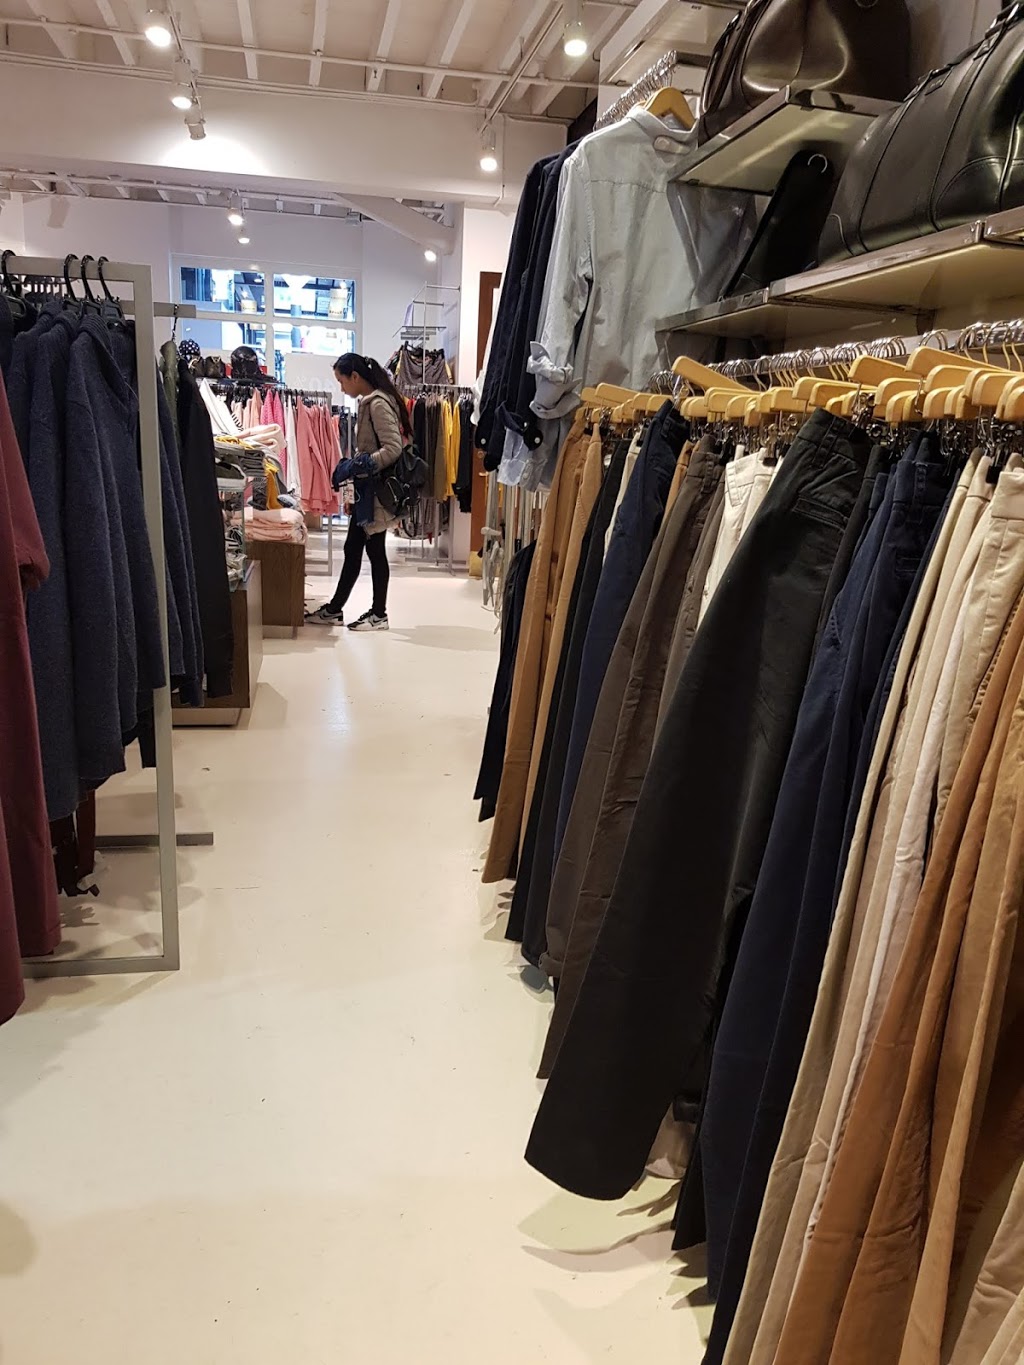 French Connection | clothing store | SHOP 191-193 BIRKENHEAD POINT S, C/143 Cary St, Drummoyne NSW 2047, Australia | 0291813577 OR +61 2 9181 3577